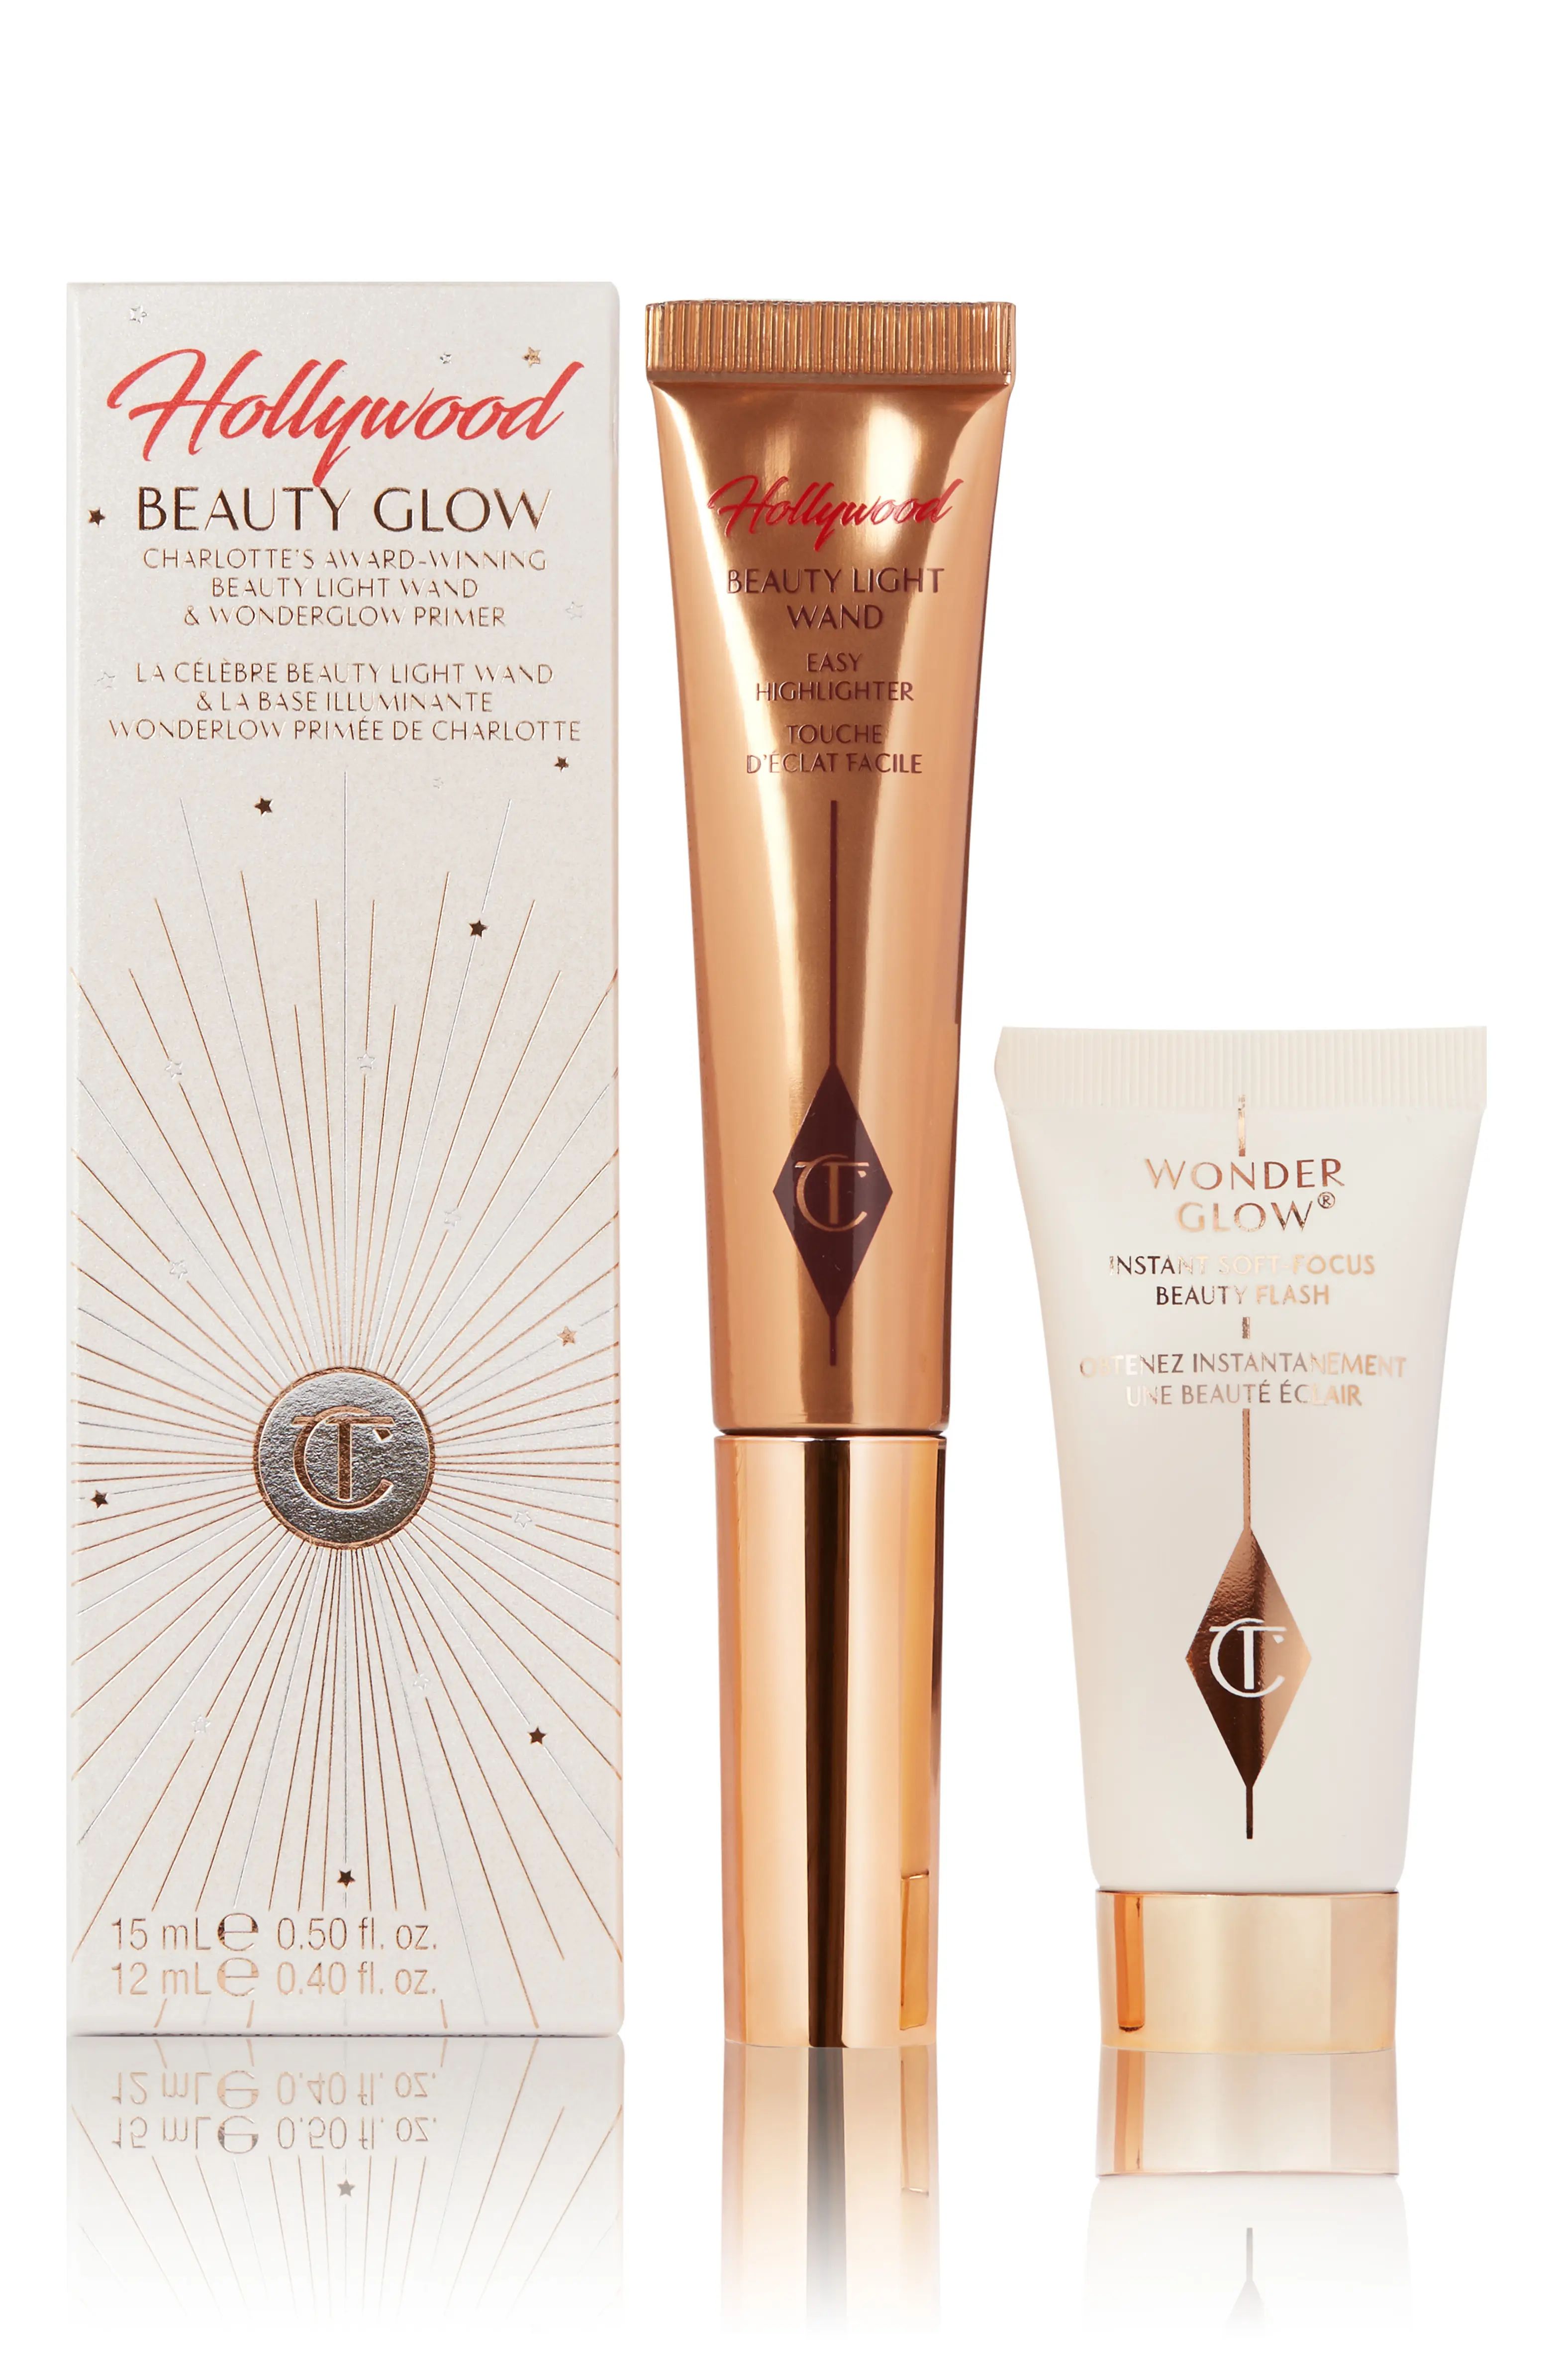 Hollywood Beauty Glow Set | Nordstrom